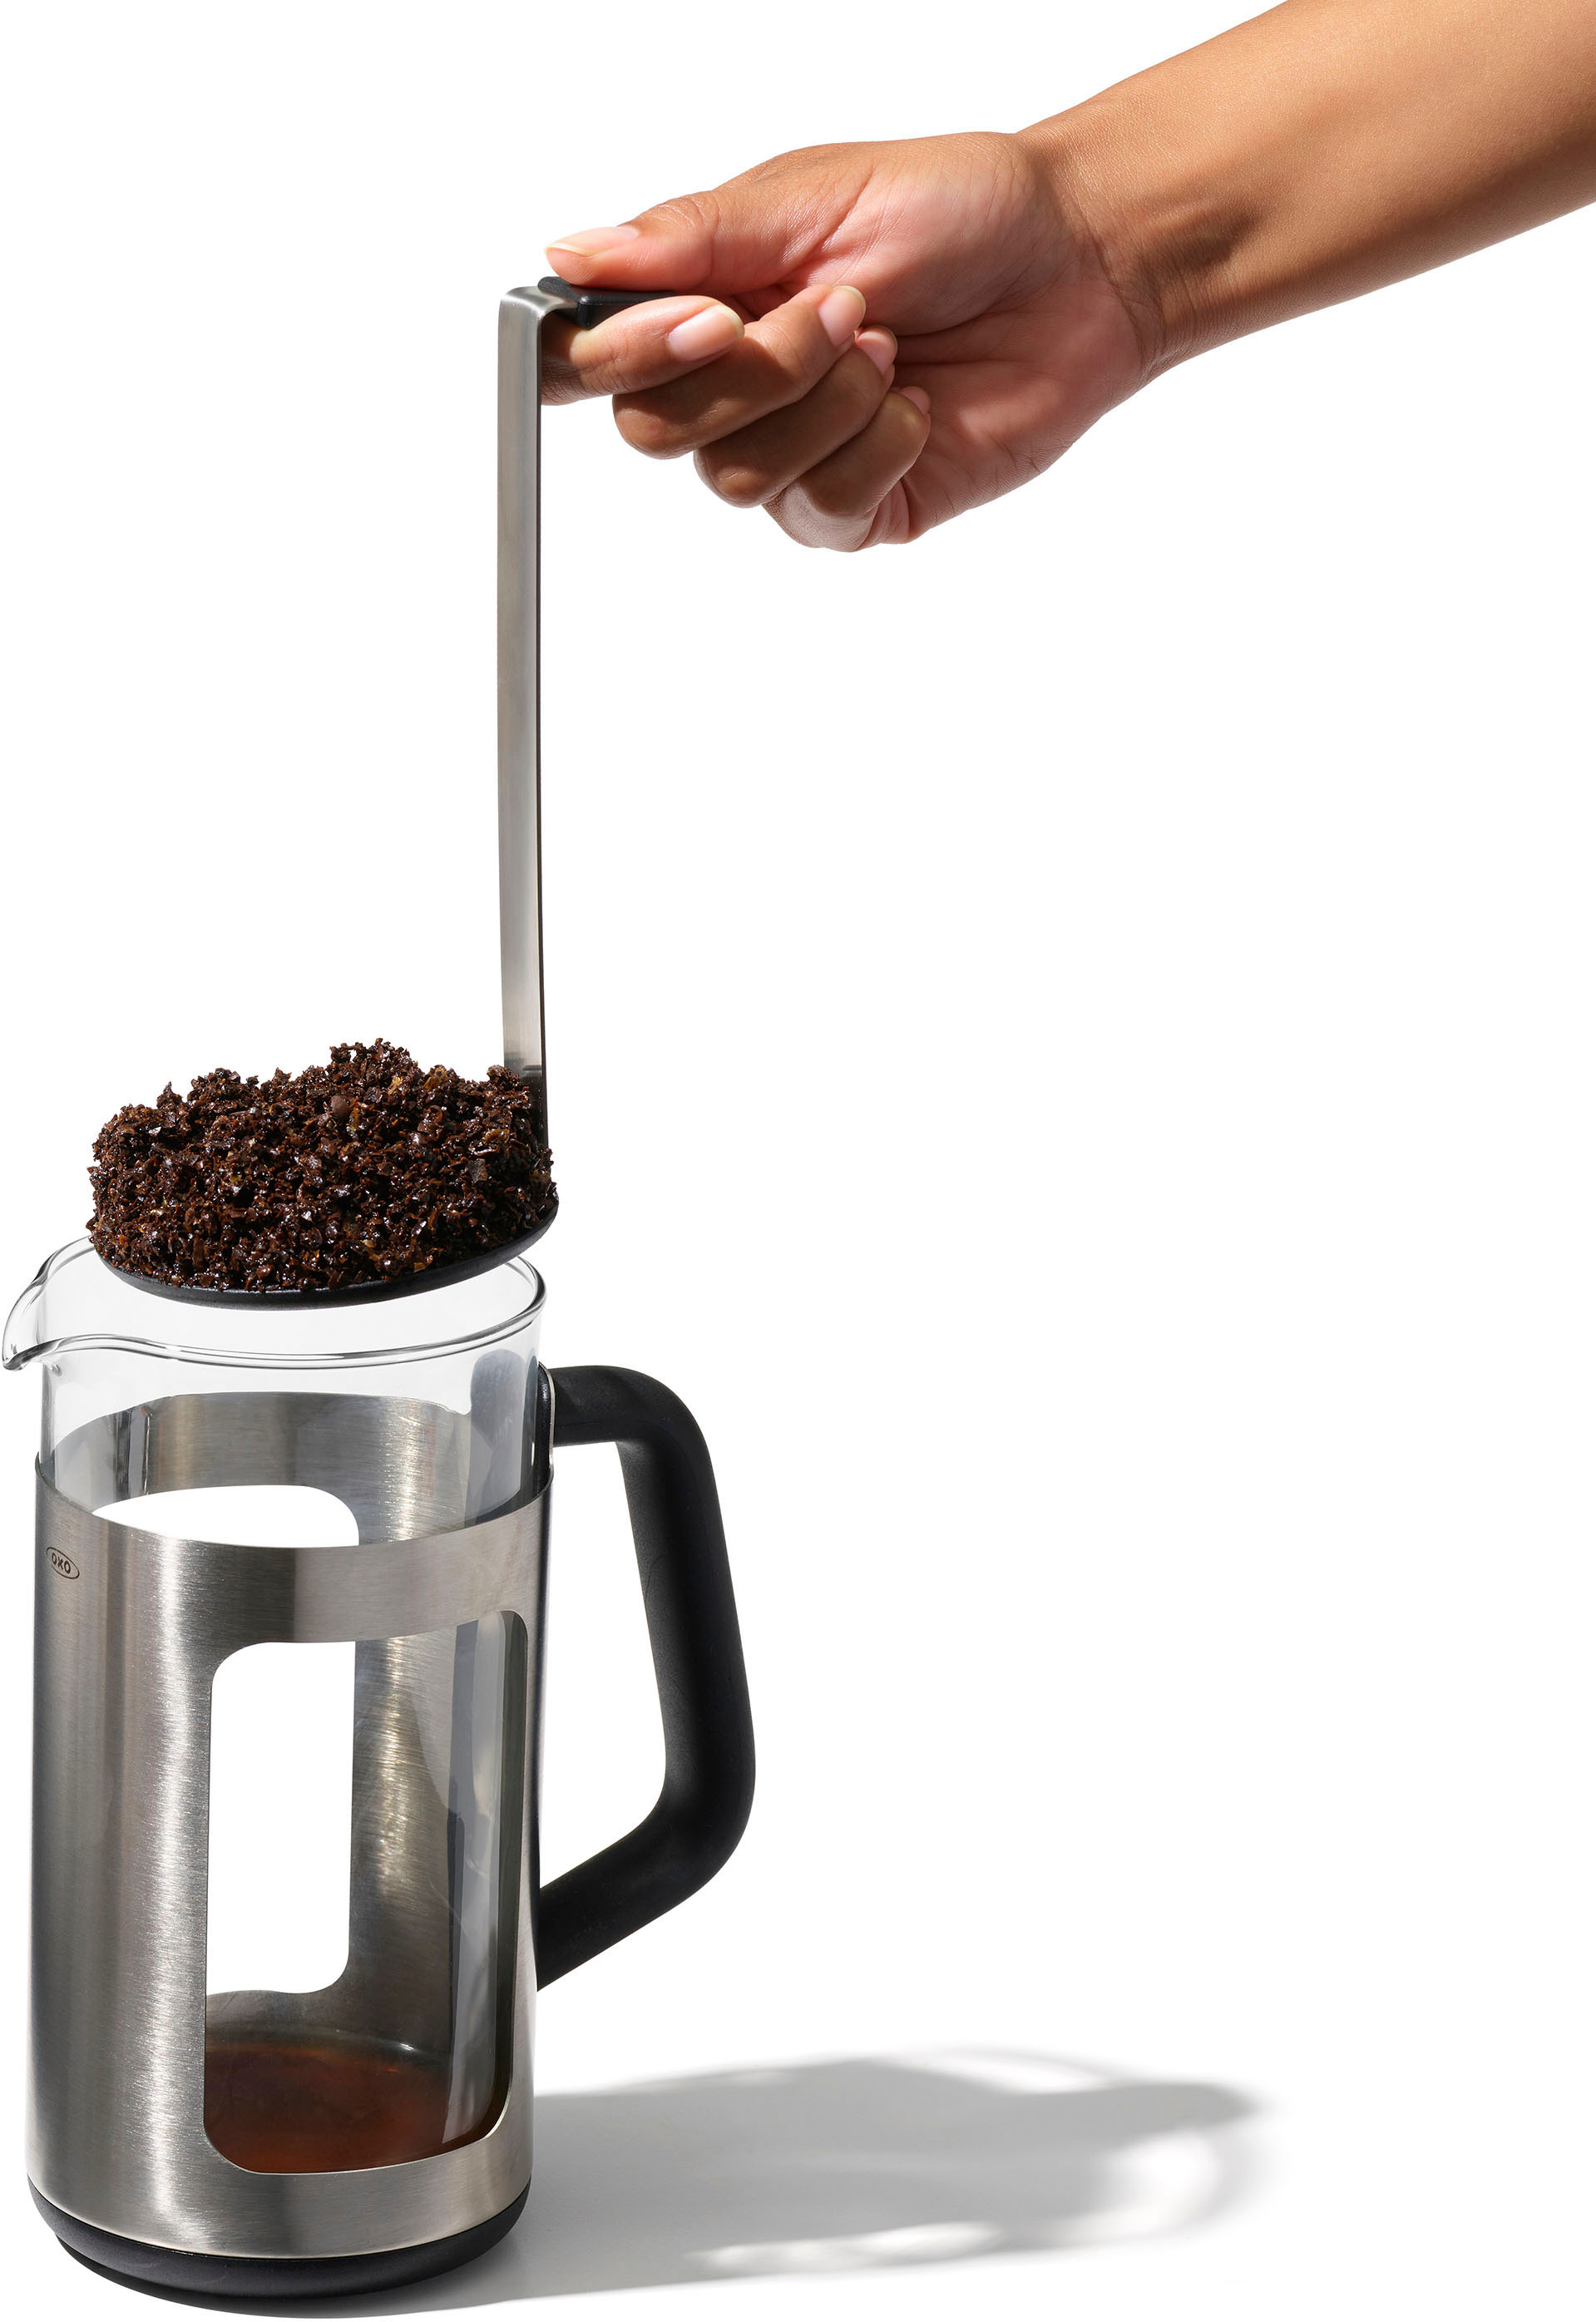 OXO Good Grips Brush to Clean Inside French Press Carafe